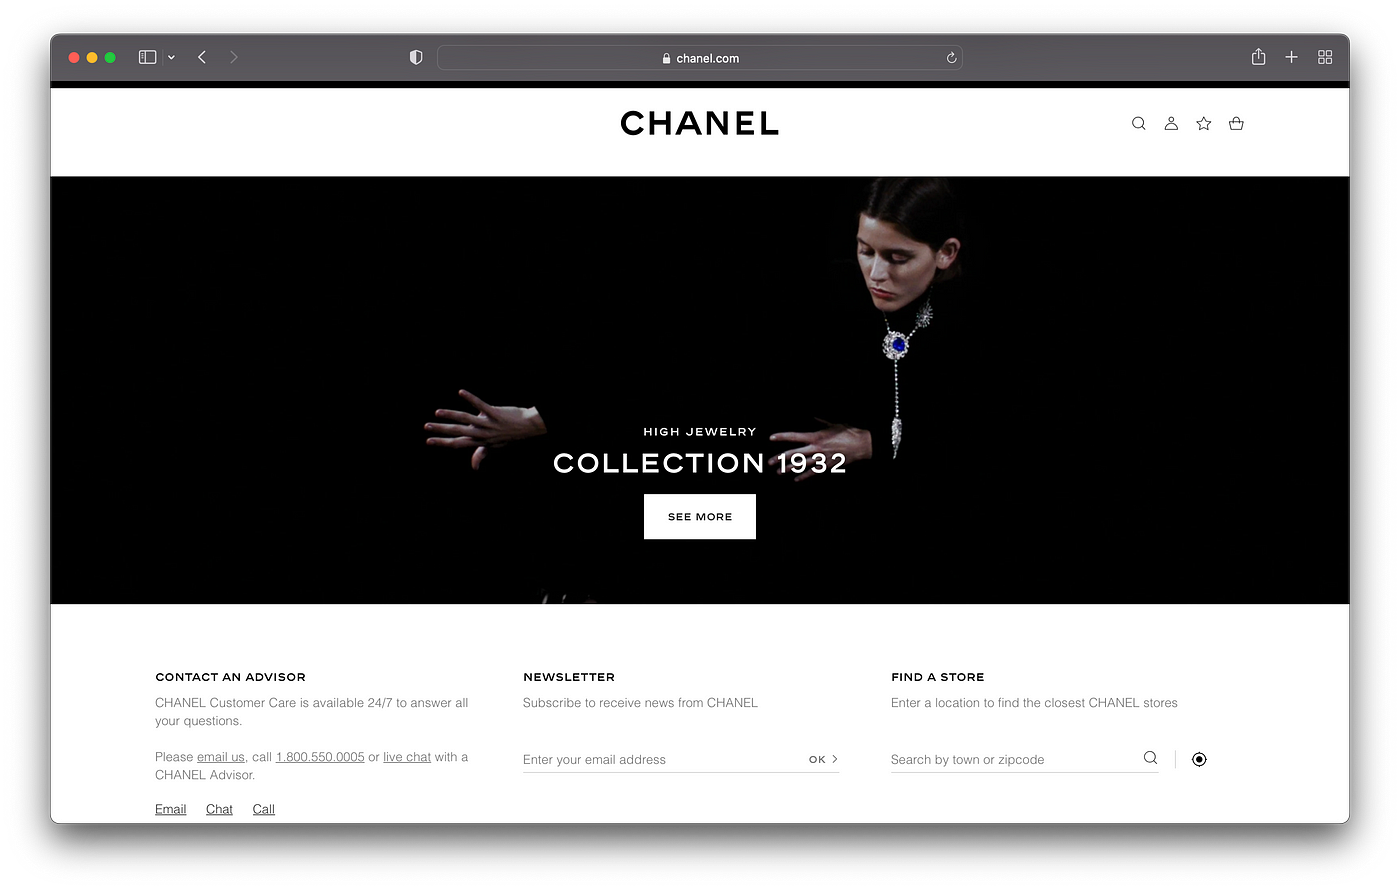 Welcome To The Virtual House Of Chanel | by Eva Khanpara | Marketing in the  Age of Digital | Medium